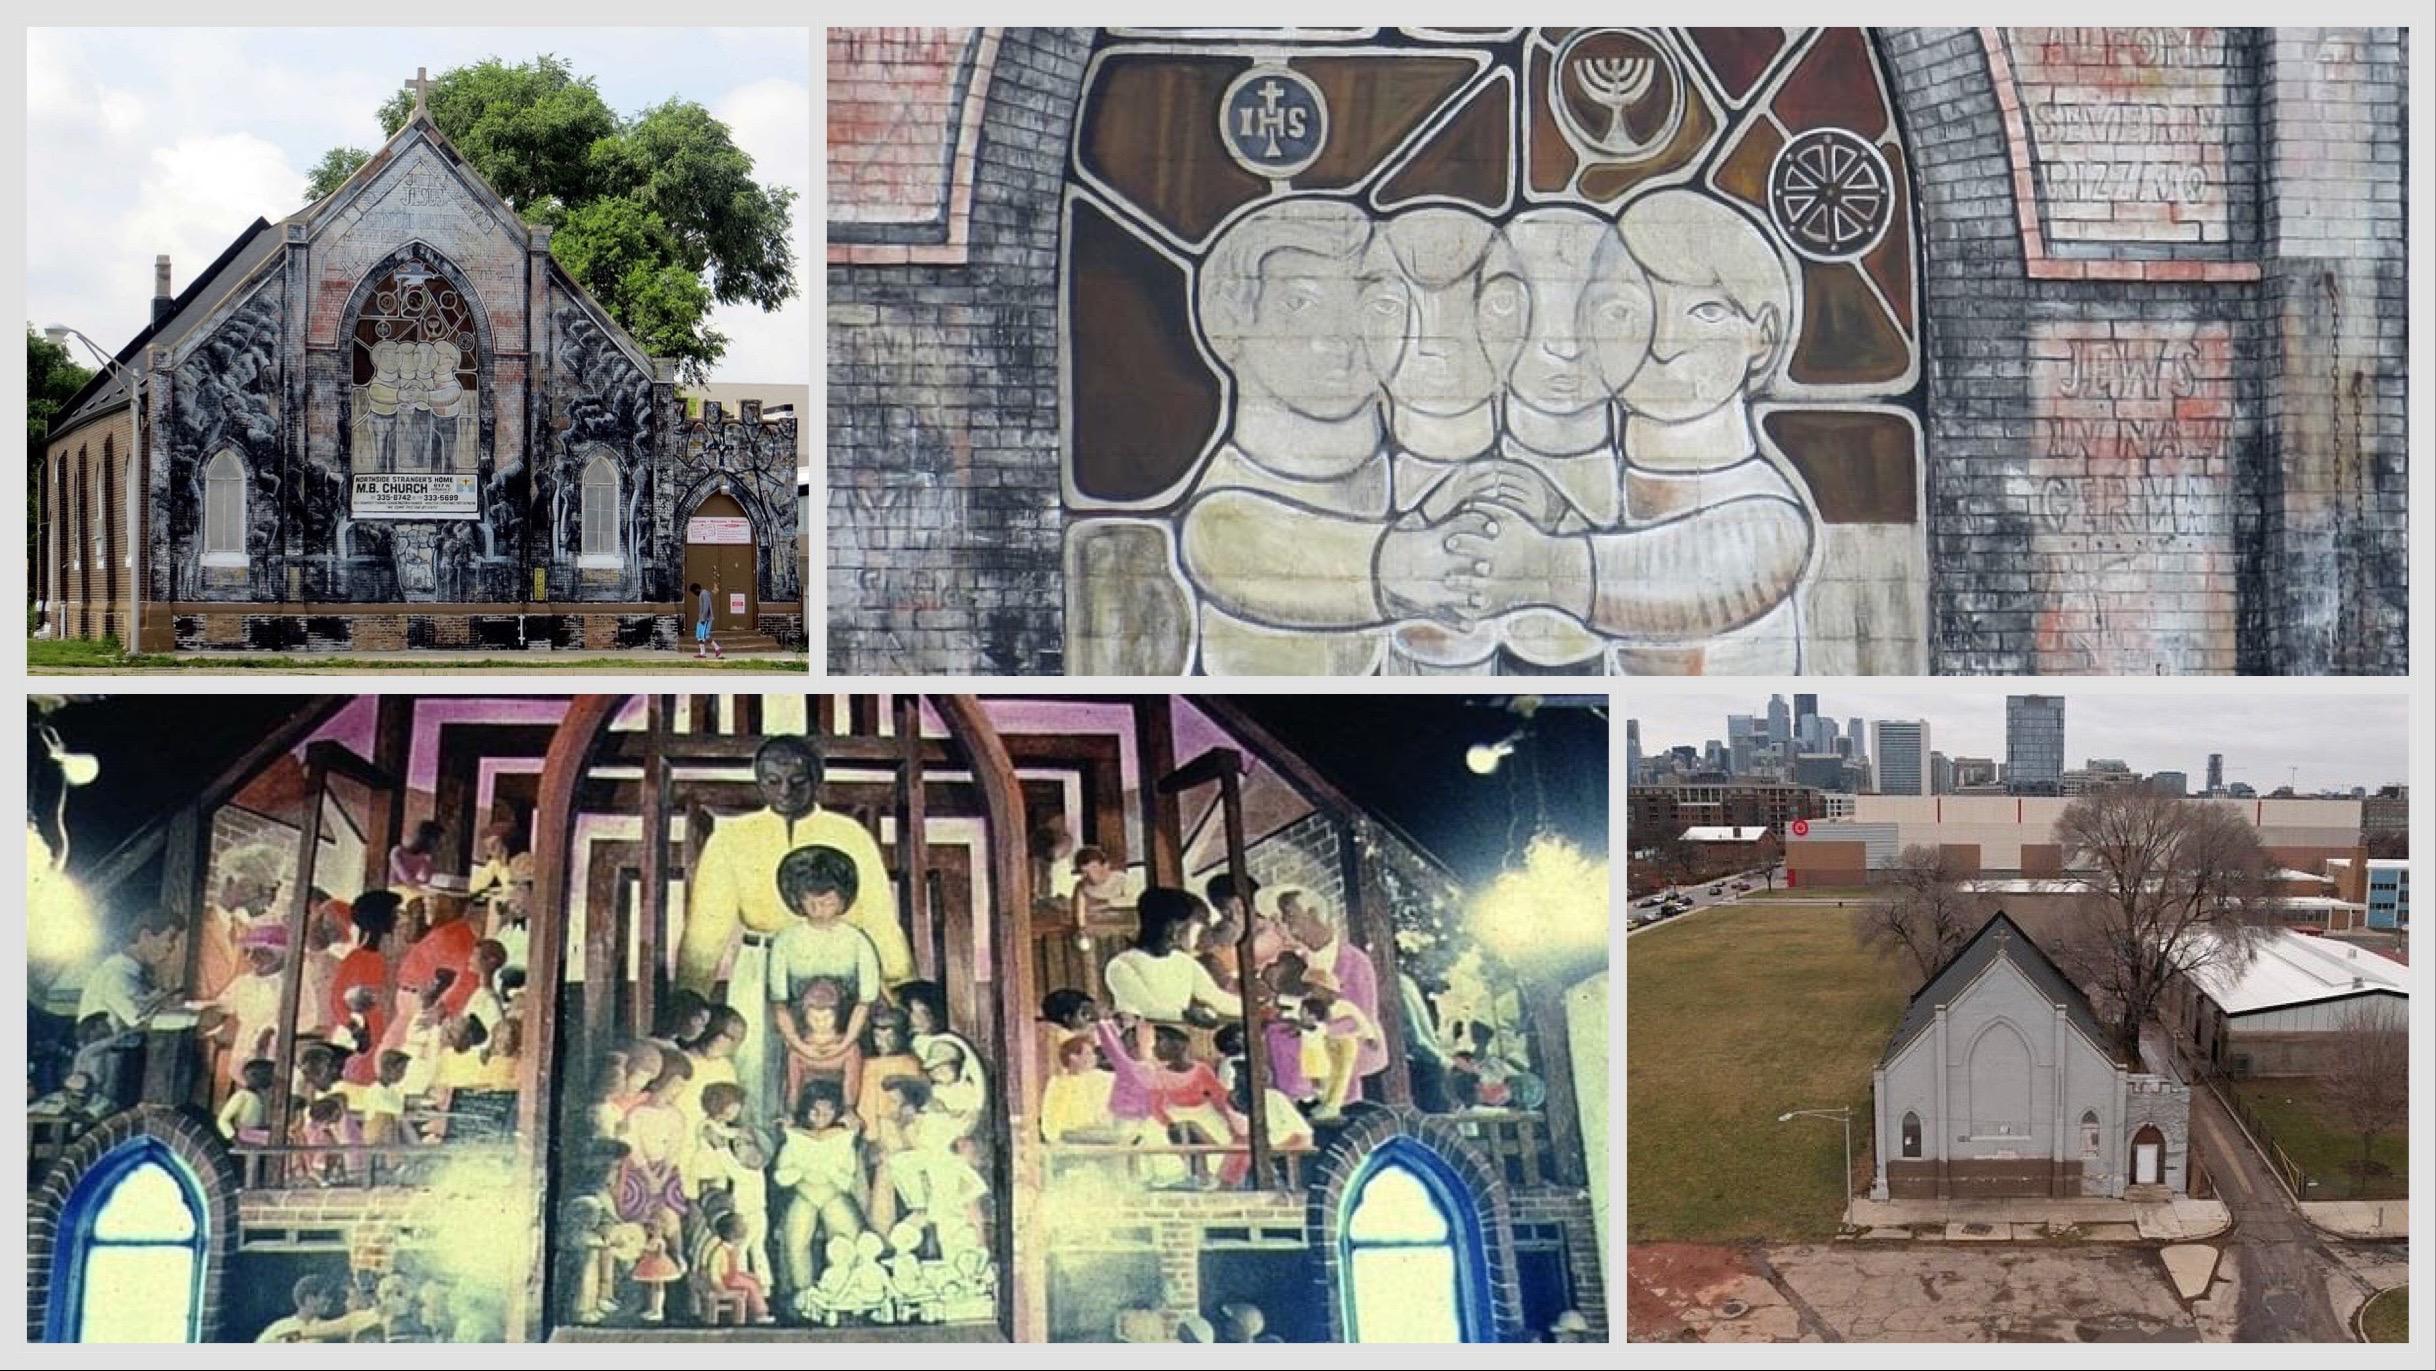 The "All of Mankind" mural, exterior and interior, and the building's current whitewashed condition. (Credits, clockwise from upper left: Debbie Mercer (2); Save All of Mankind / Art House Coalition / Cabrini Art House Project; Jeff Heubner)